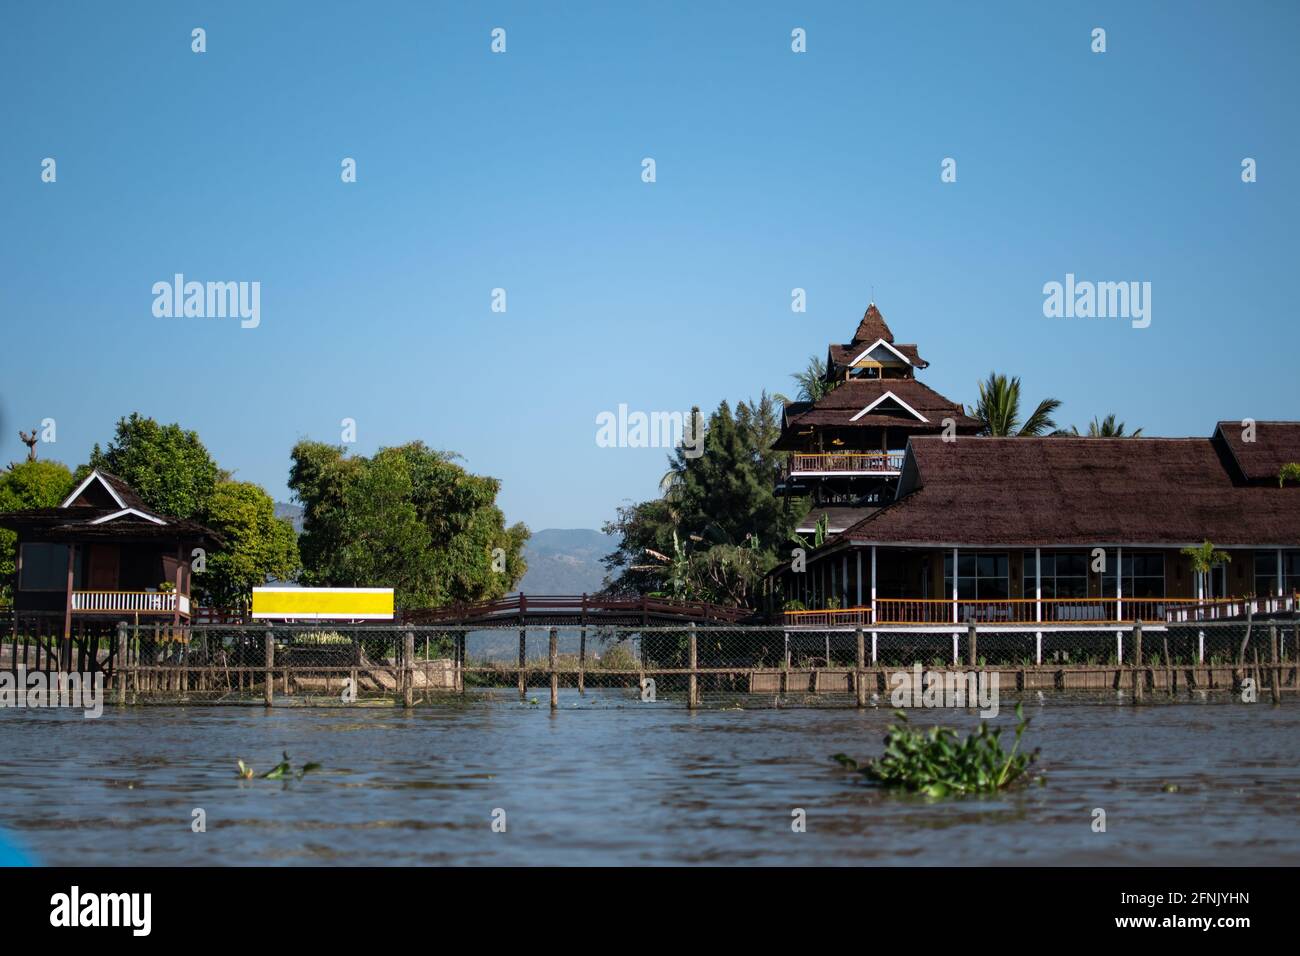 Red elevated buildings by the riverside of the canals at Inle Lake, Nyaung Shwe, Shan state, Mayanmar Stock Photo